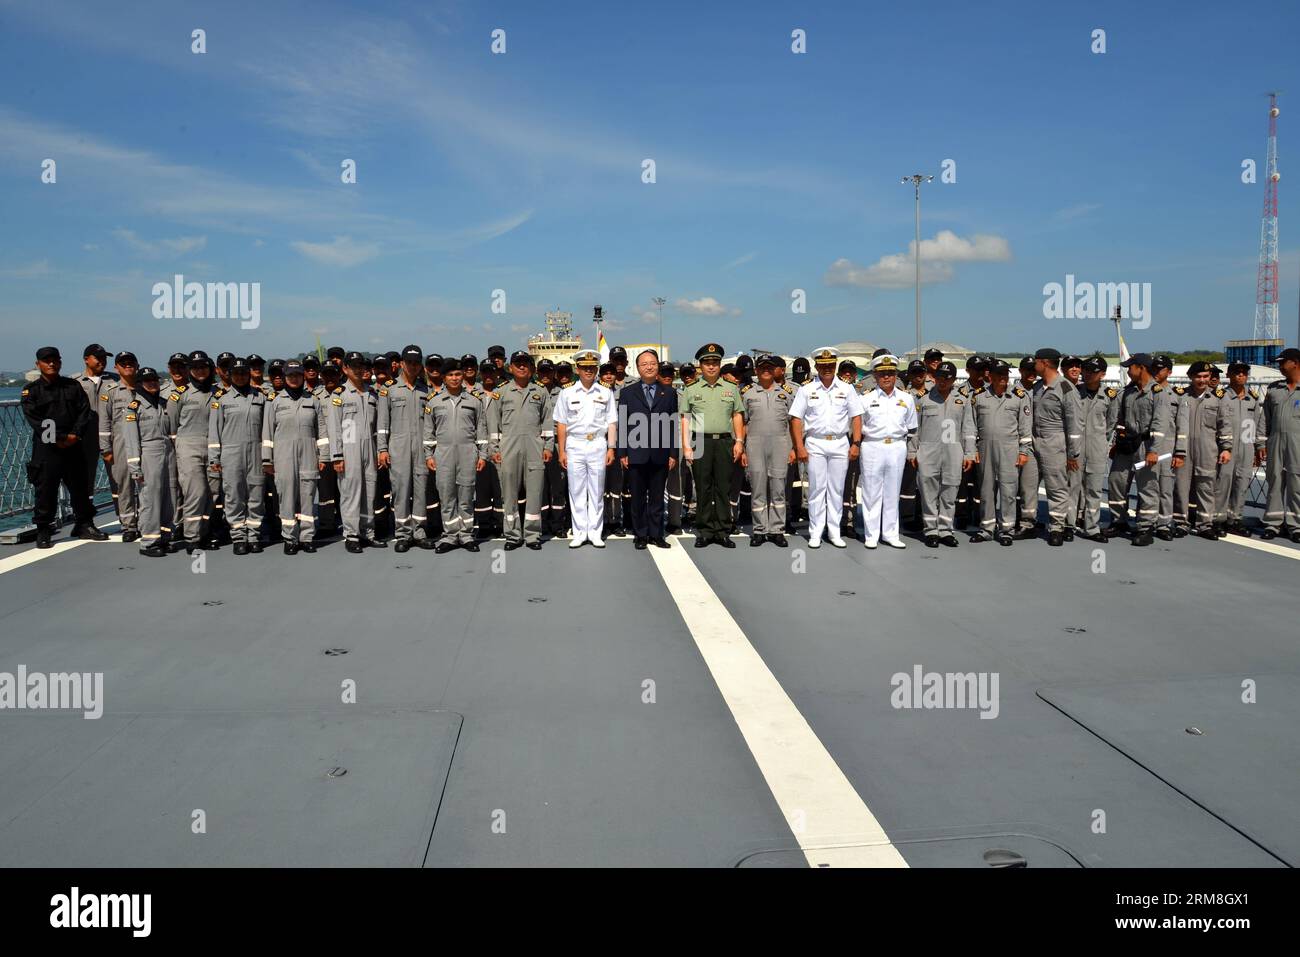 Officers pose for photos on a Royal Brunei Navy vessel in Muara Port, Brunei, April 14, 2014. A total crew of 69 Royal Brunei Navy (RBN) personnel including attachments set sail on their vessel KDB DARULEHSAN on Monday to attend the Western Pacific Naval Symposium and join the Multilateral Maritime Exercise (MMEx) to be held in Qingdao, a port city in China s Shandong province. (Xinhua/Zheng Jie) BRUNEI-MUARA PORT-NAVY PUBLICATIONxNOTxINxCHN   Officers Pose for Photos ON a Royal Brunei Darussalam Navy Vessel in Muara Port Brunei Darussalam April 14 2014 a total Crew of 69 Royal Brunei Darussal Stock Photo